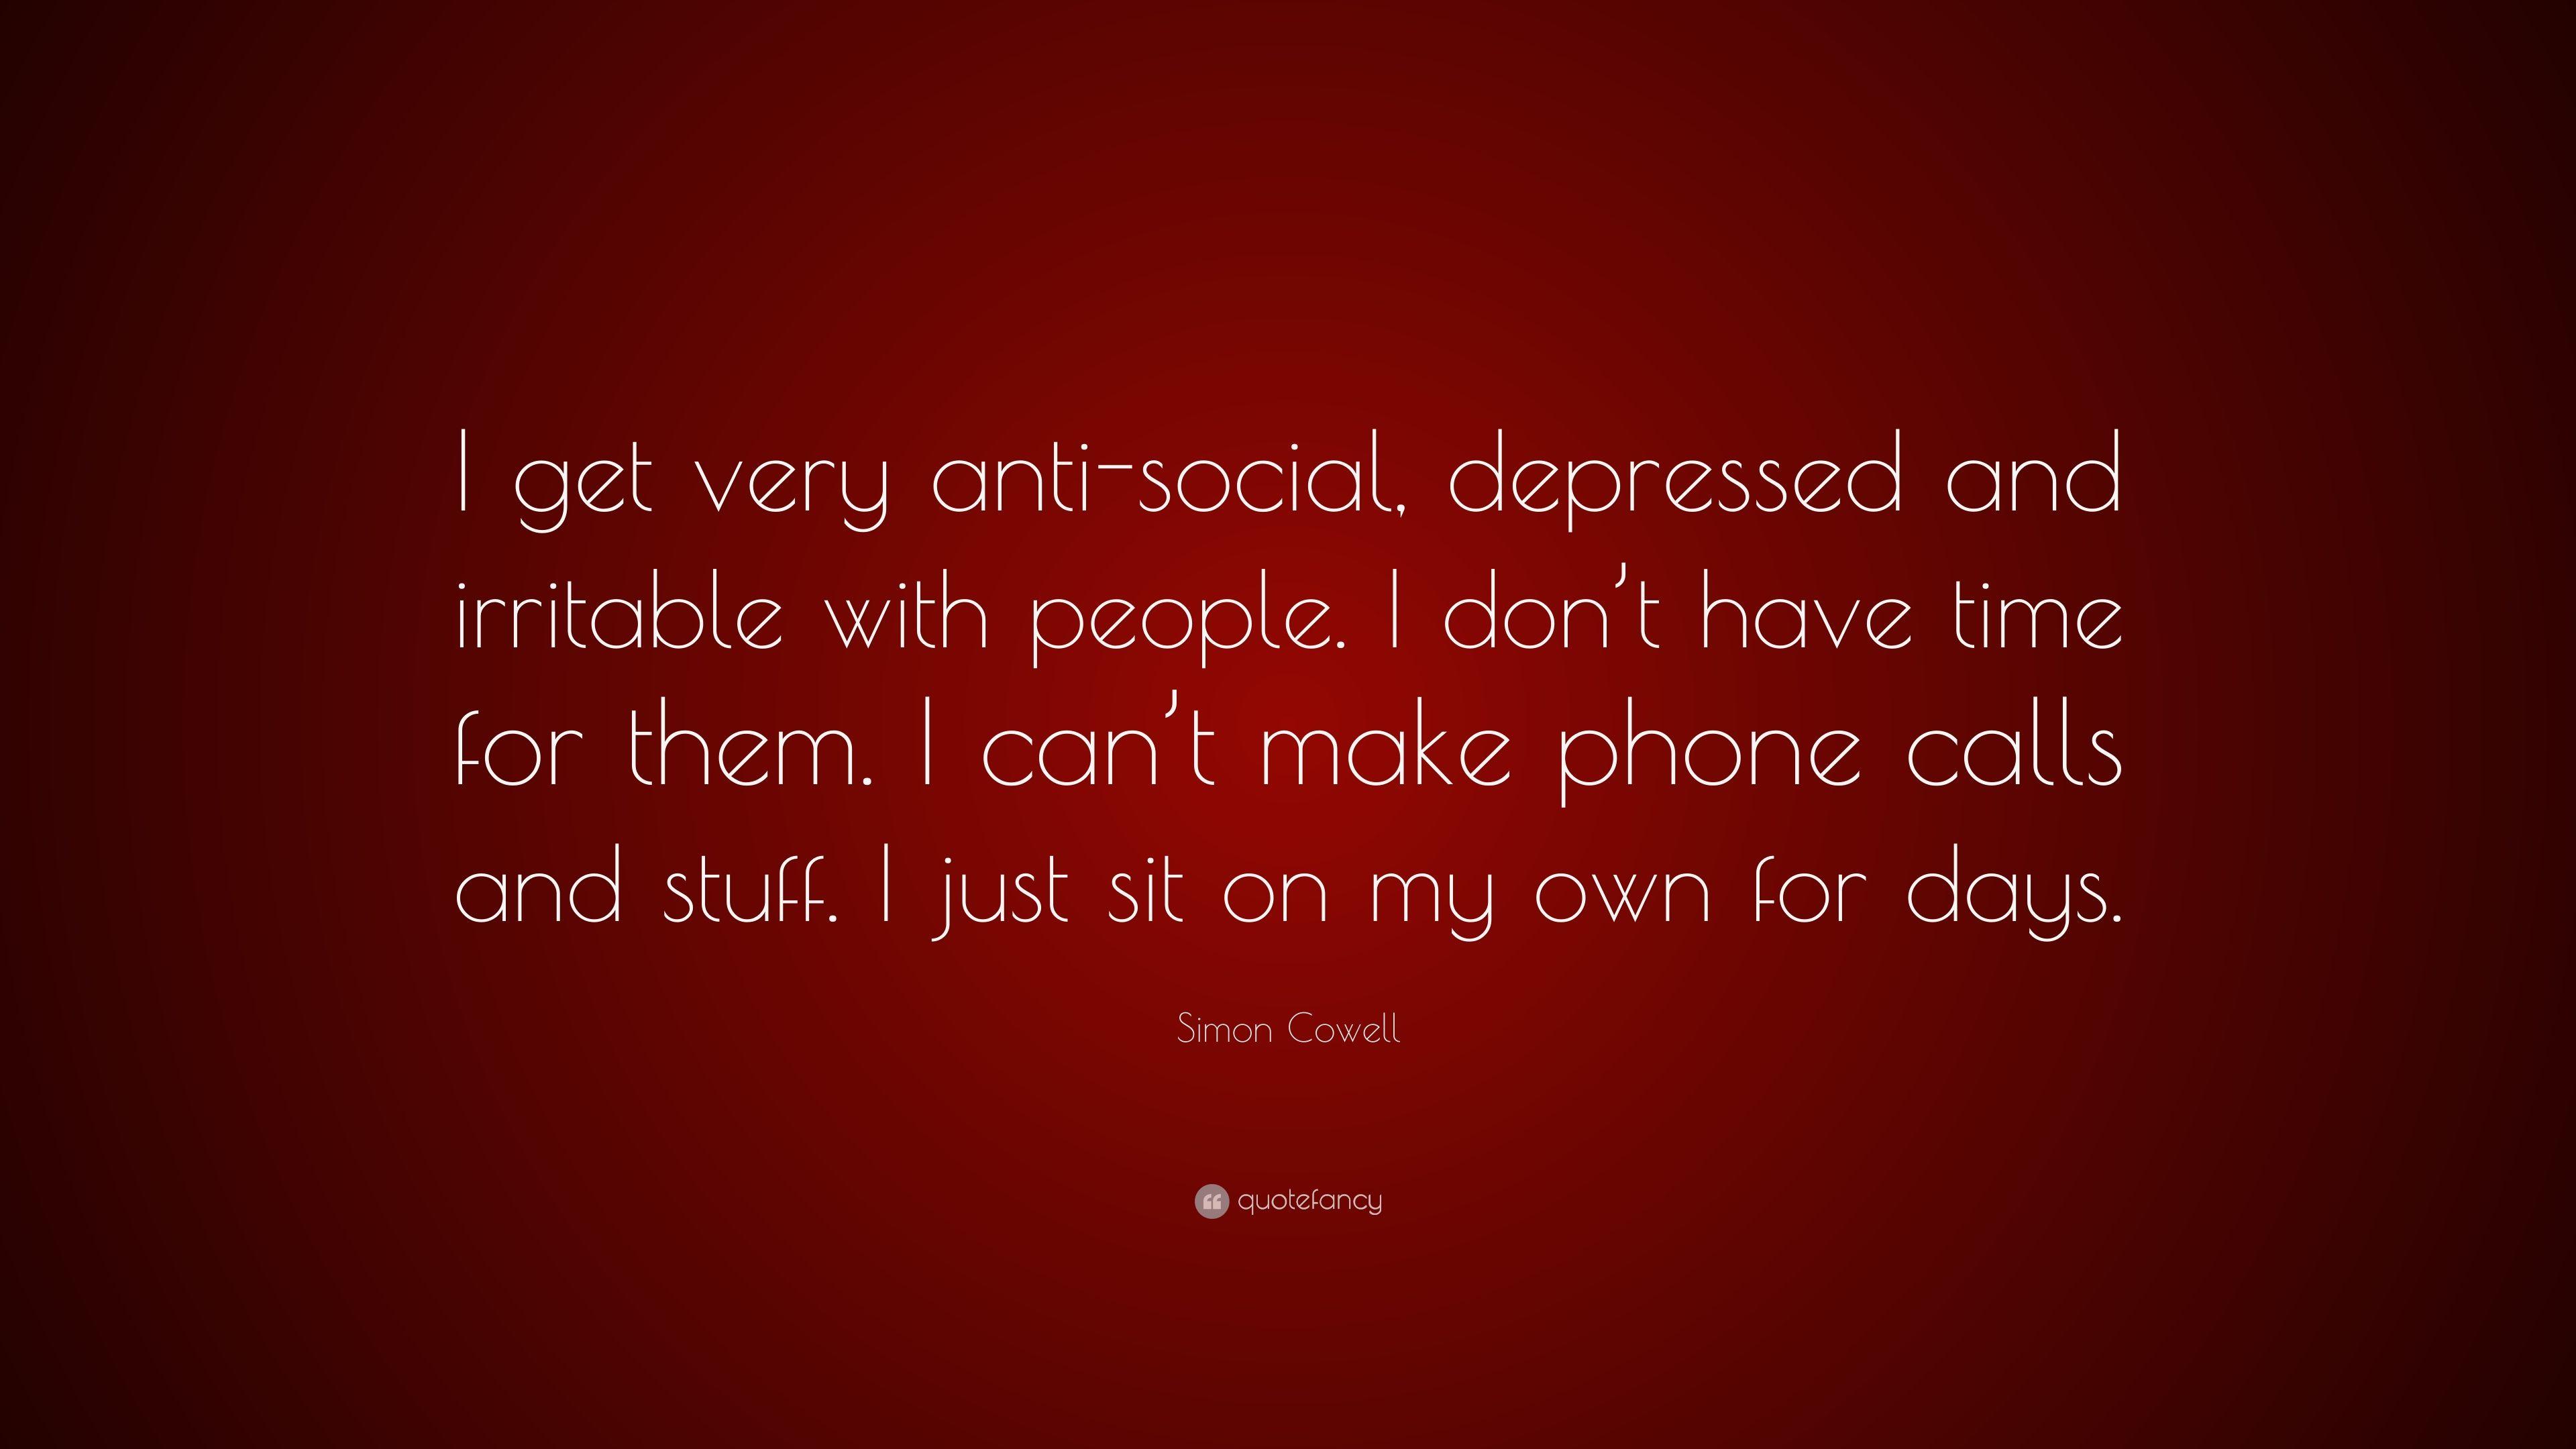 Simon Cowell Quote: “I Get Very Anti Social, Depressed And Irritable